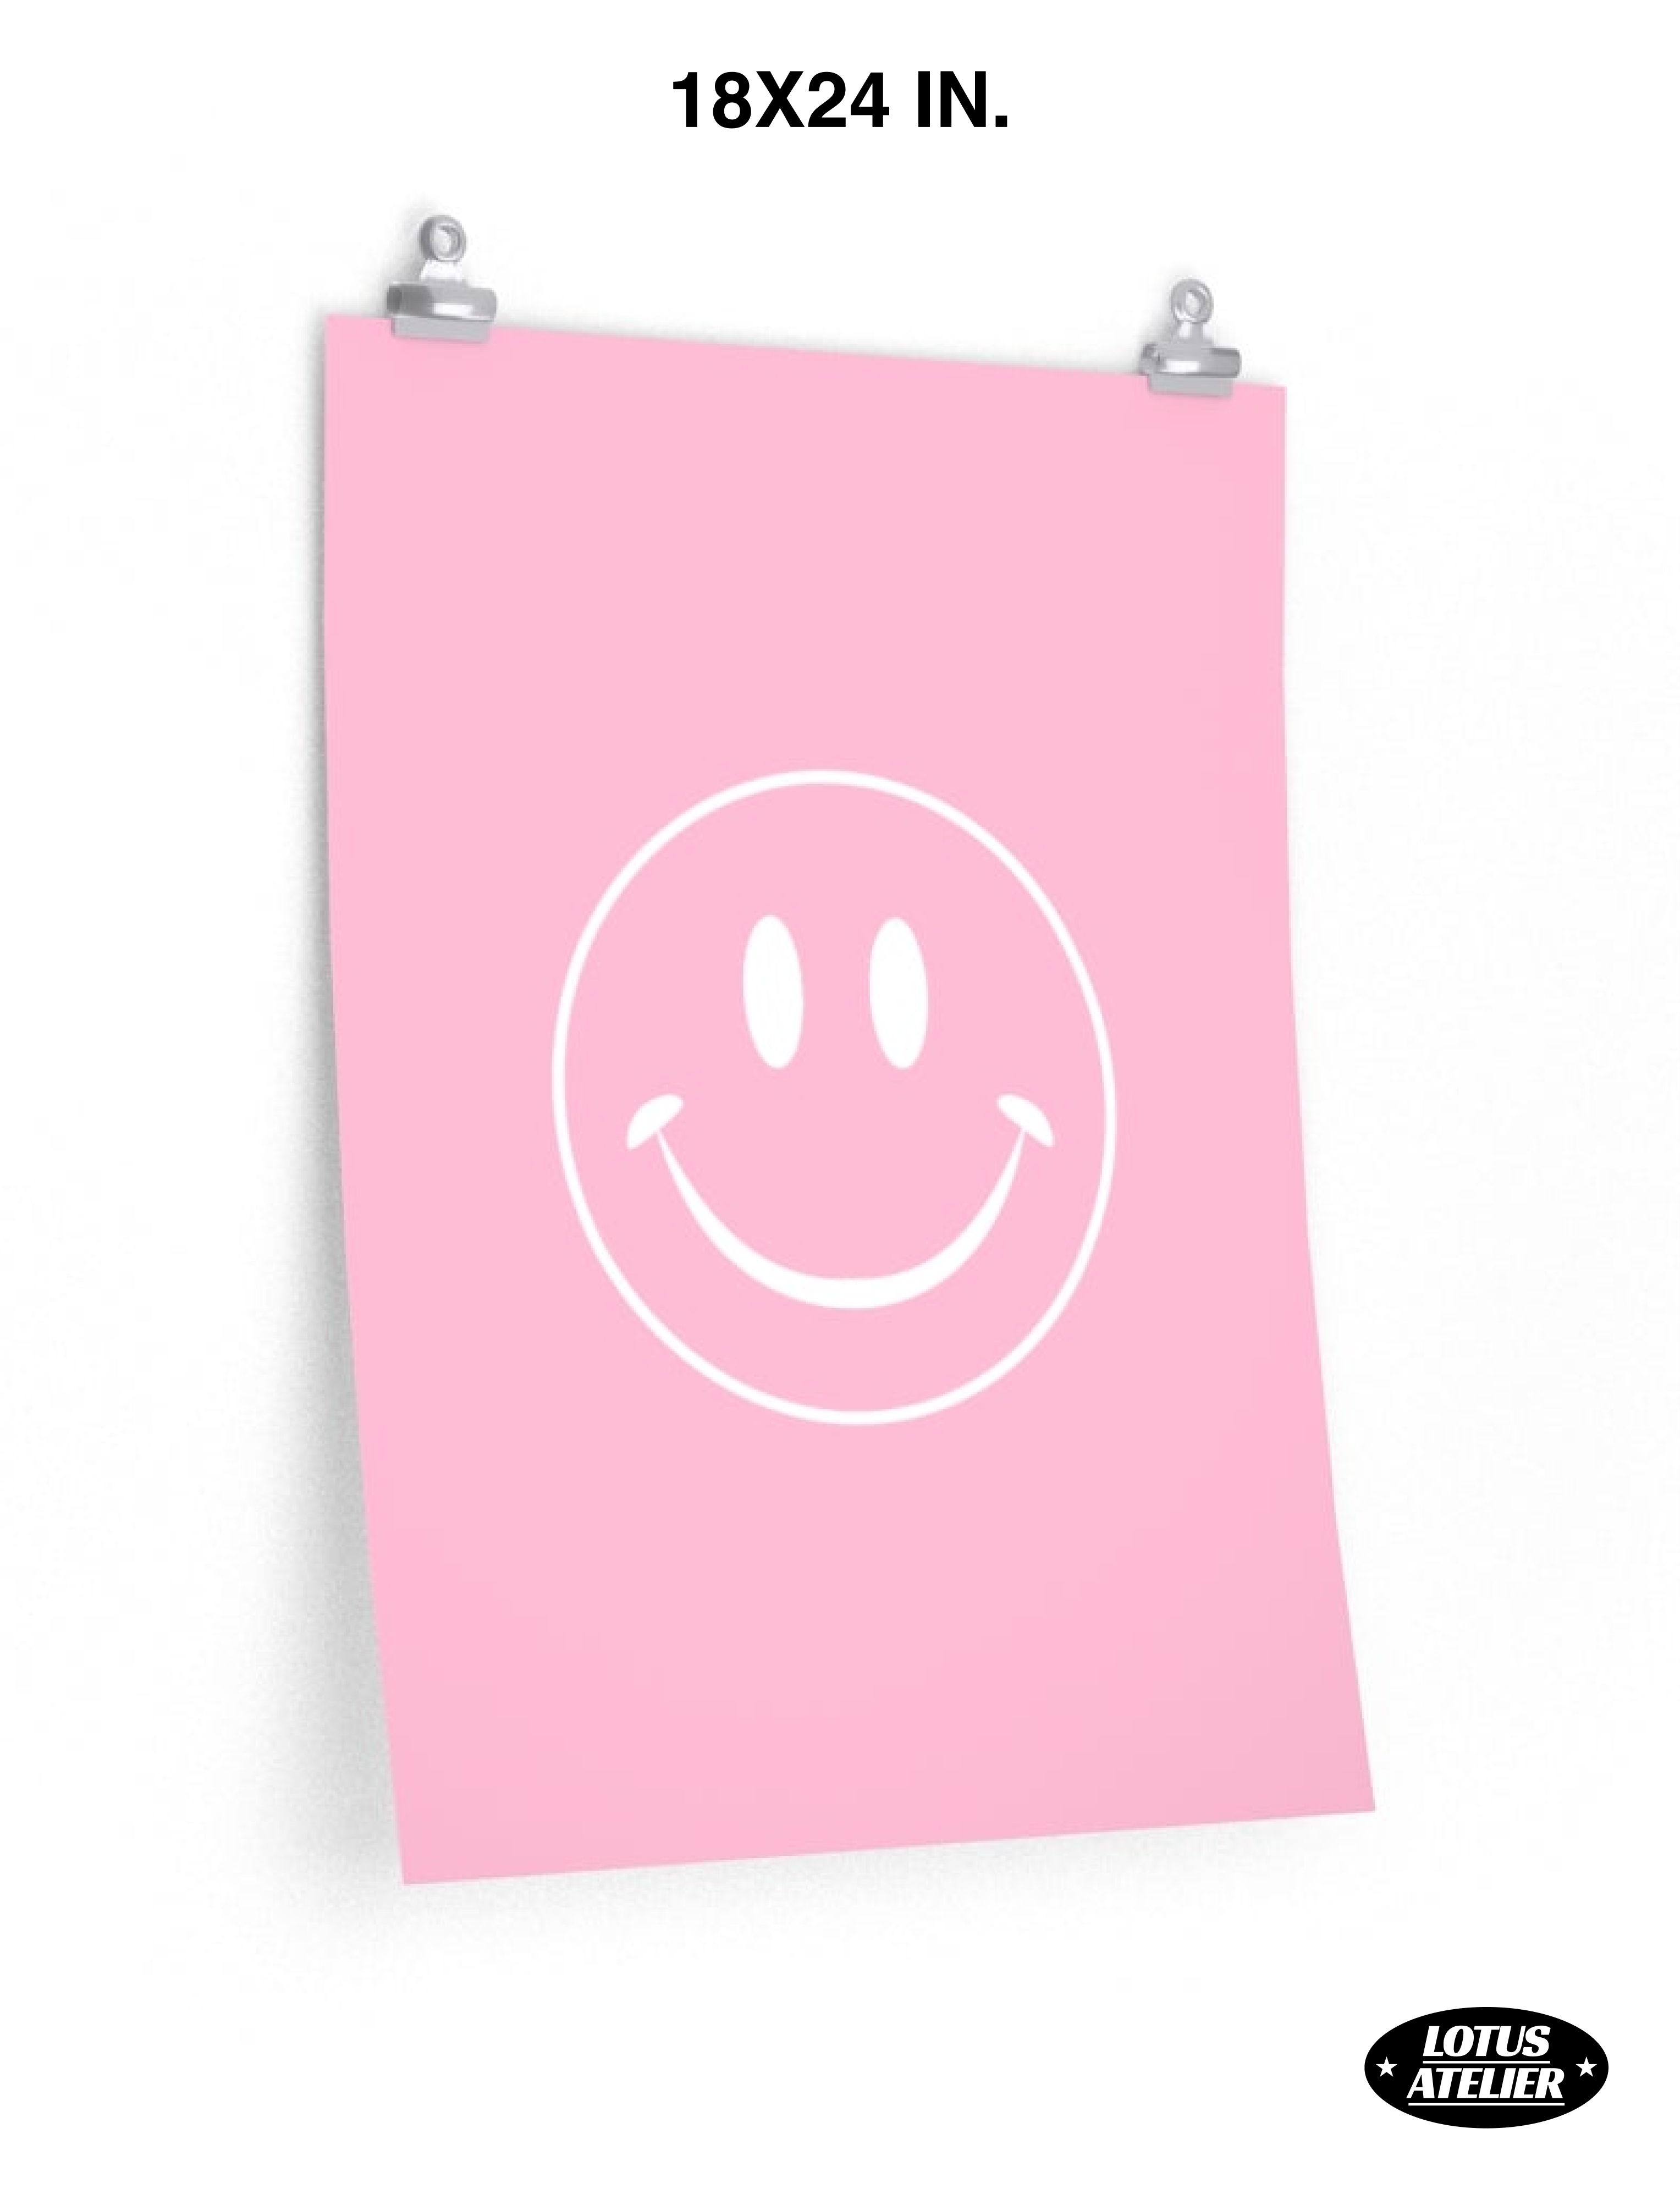 Cute Smiley Face Poster for Room | Bedroom Posters & Preppy Room Decor | Danish Pastel Aesthetic Poster Wall Decor | UNFRAMED